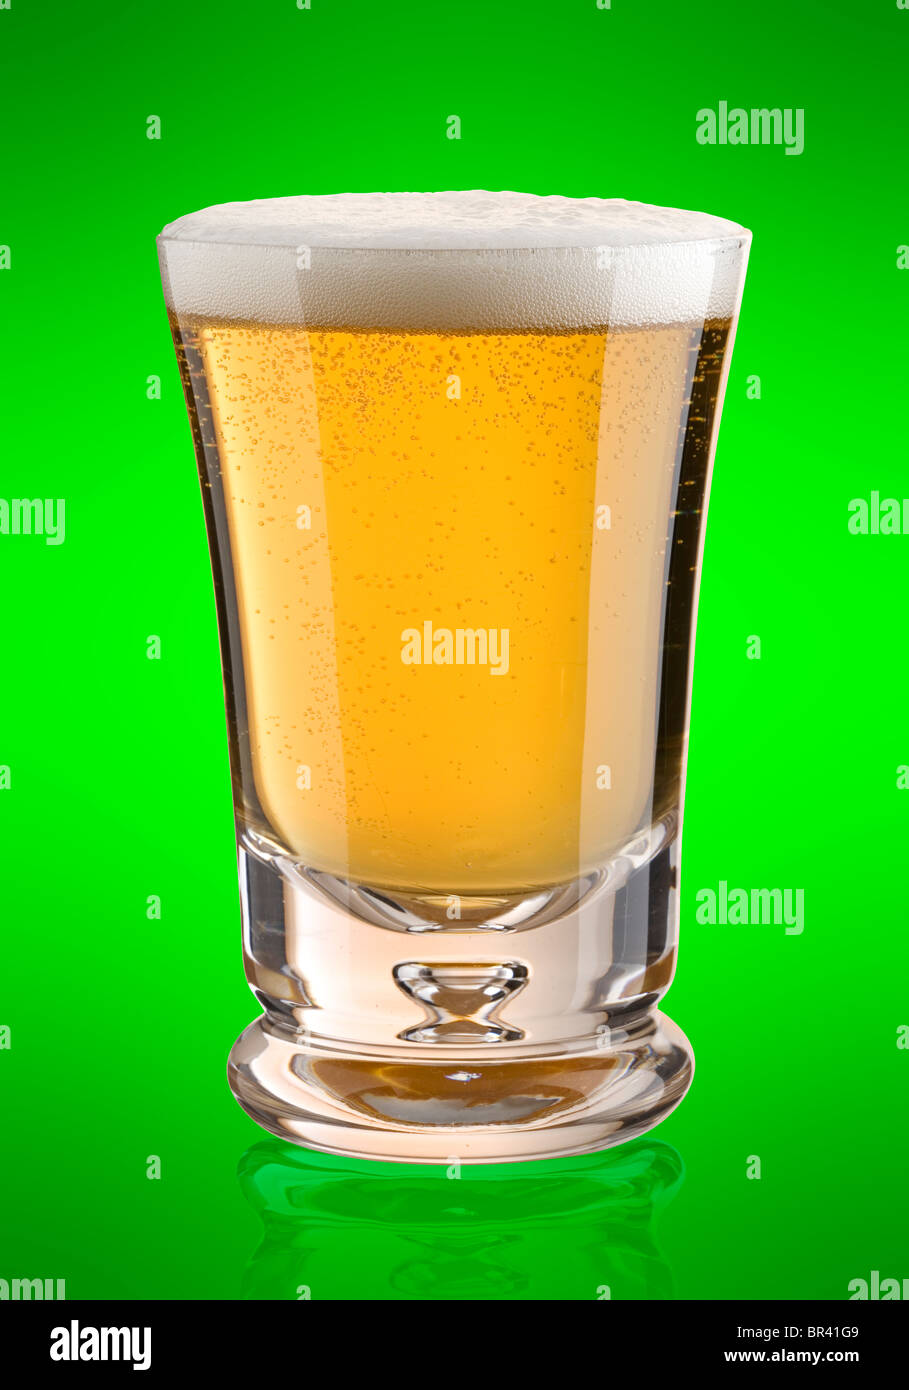 lager on a green background Stock Photo